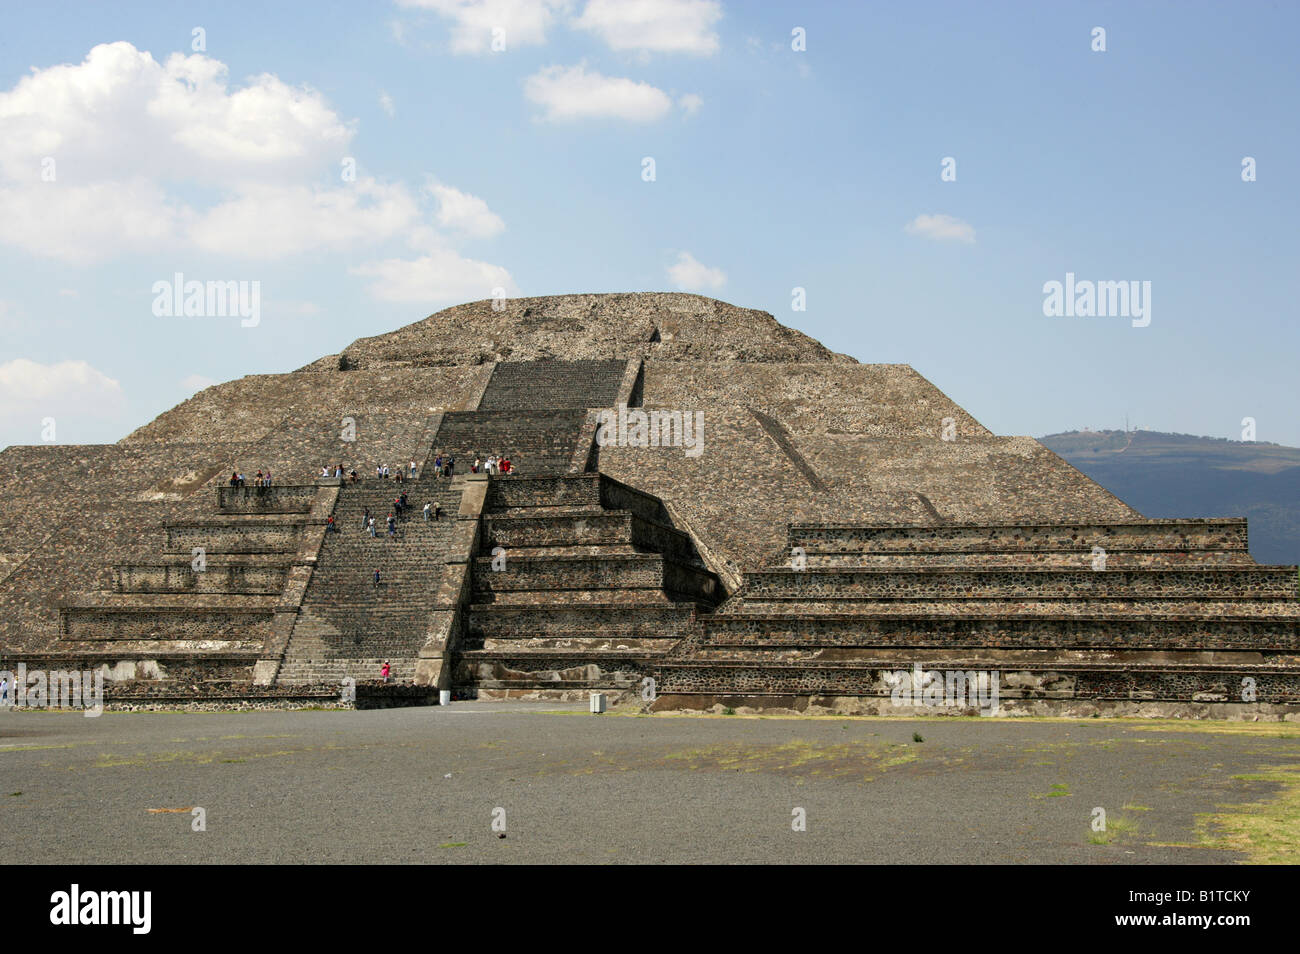 The Pyramid of the Moon, Plaza of the Moon, Teotihuacan, Mexico Stock Photo